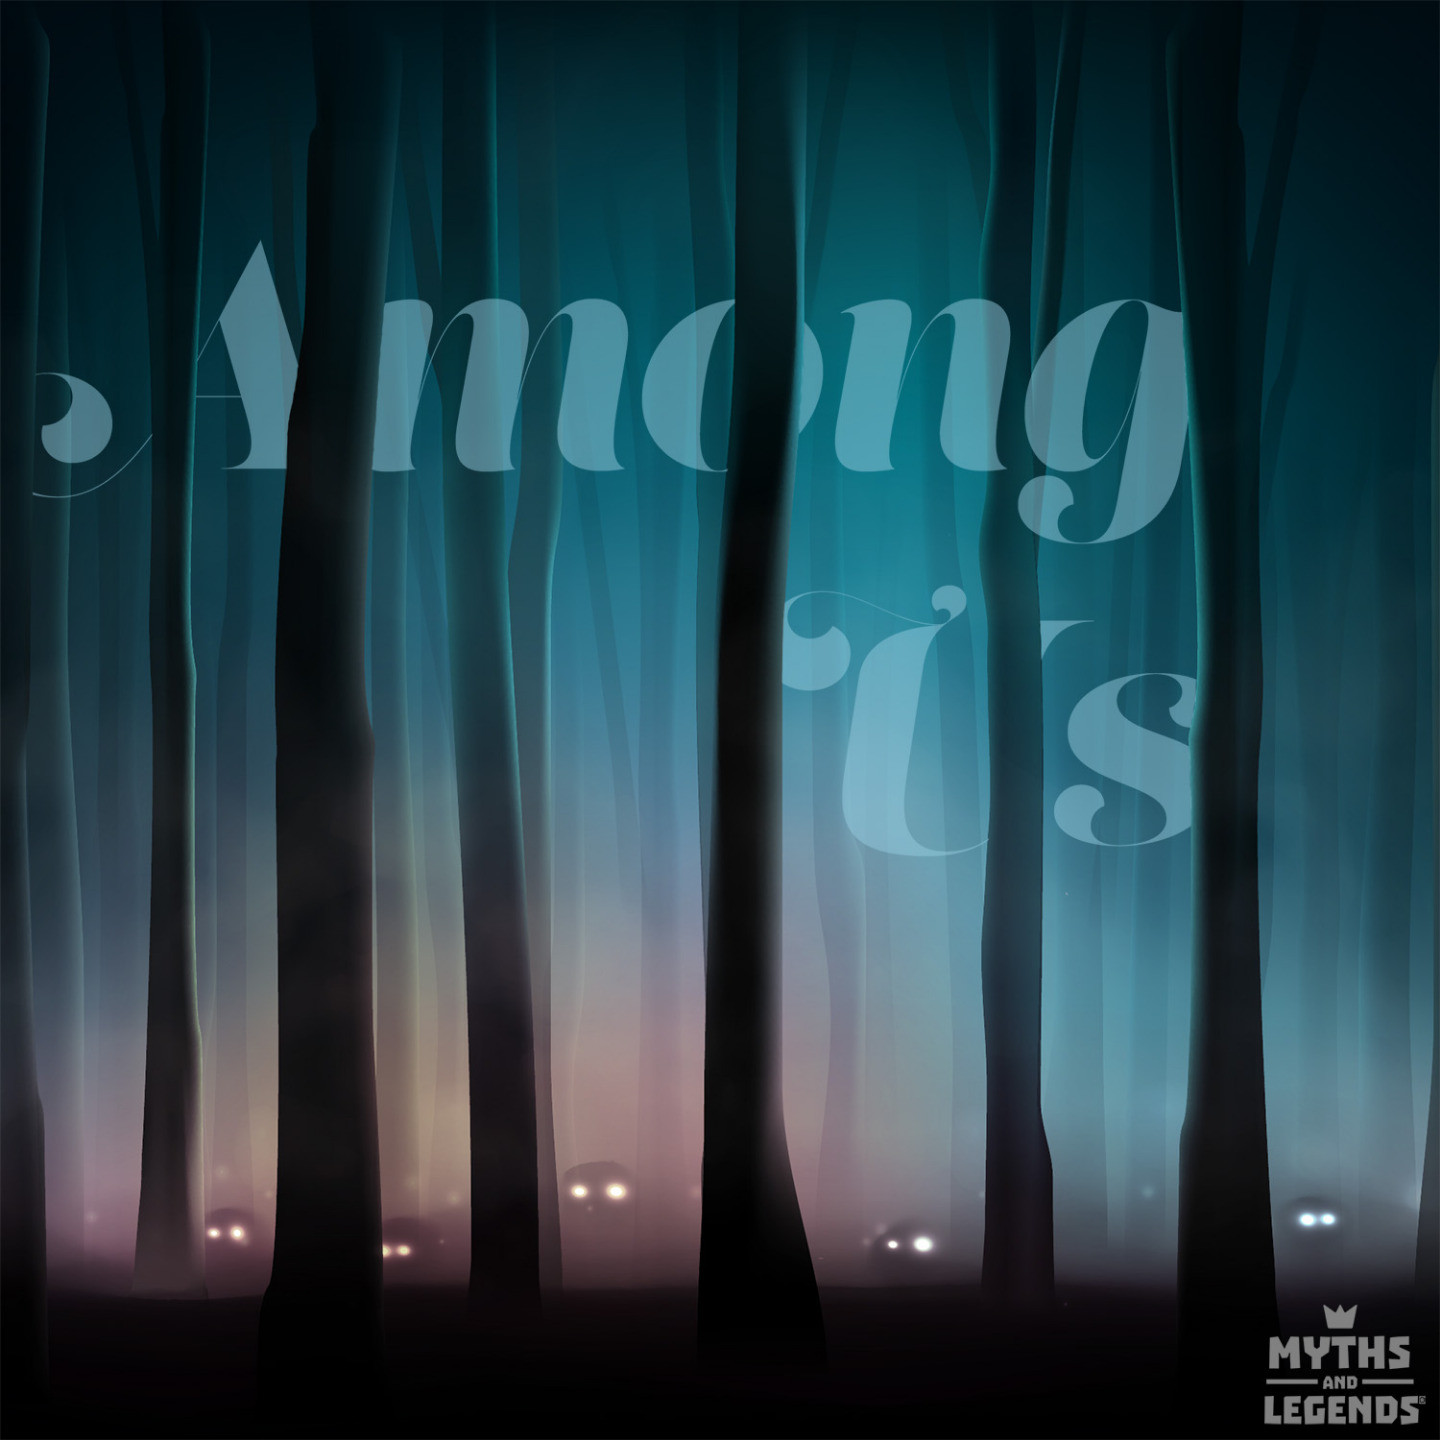 The show art for Myths and Legends episode 304. "Among Us" is in a swoopy, blue, half-transparent font behind some trees in a hazy, similarly blue forest. Below, in a red and purple haze, are eyes glowing in the darkness. The updated Myths and Legends logo is in the bottom-right corner.